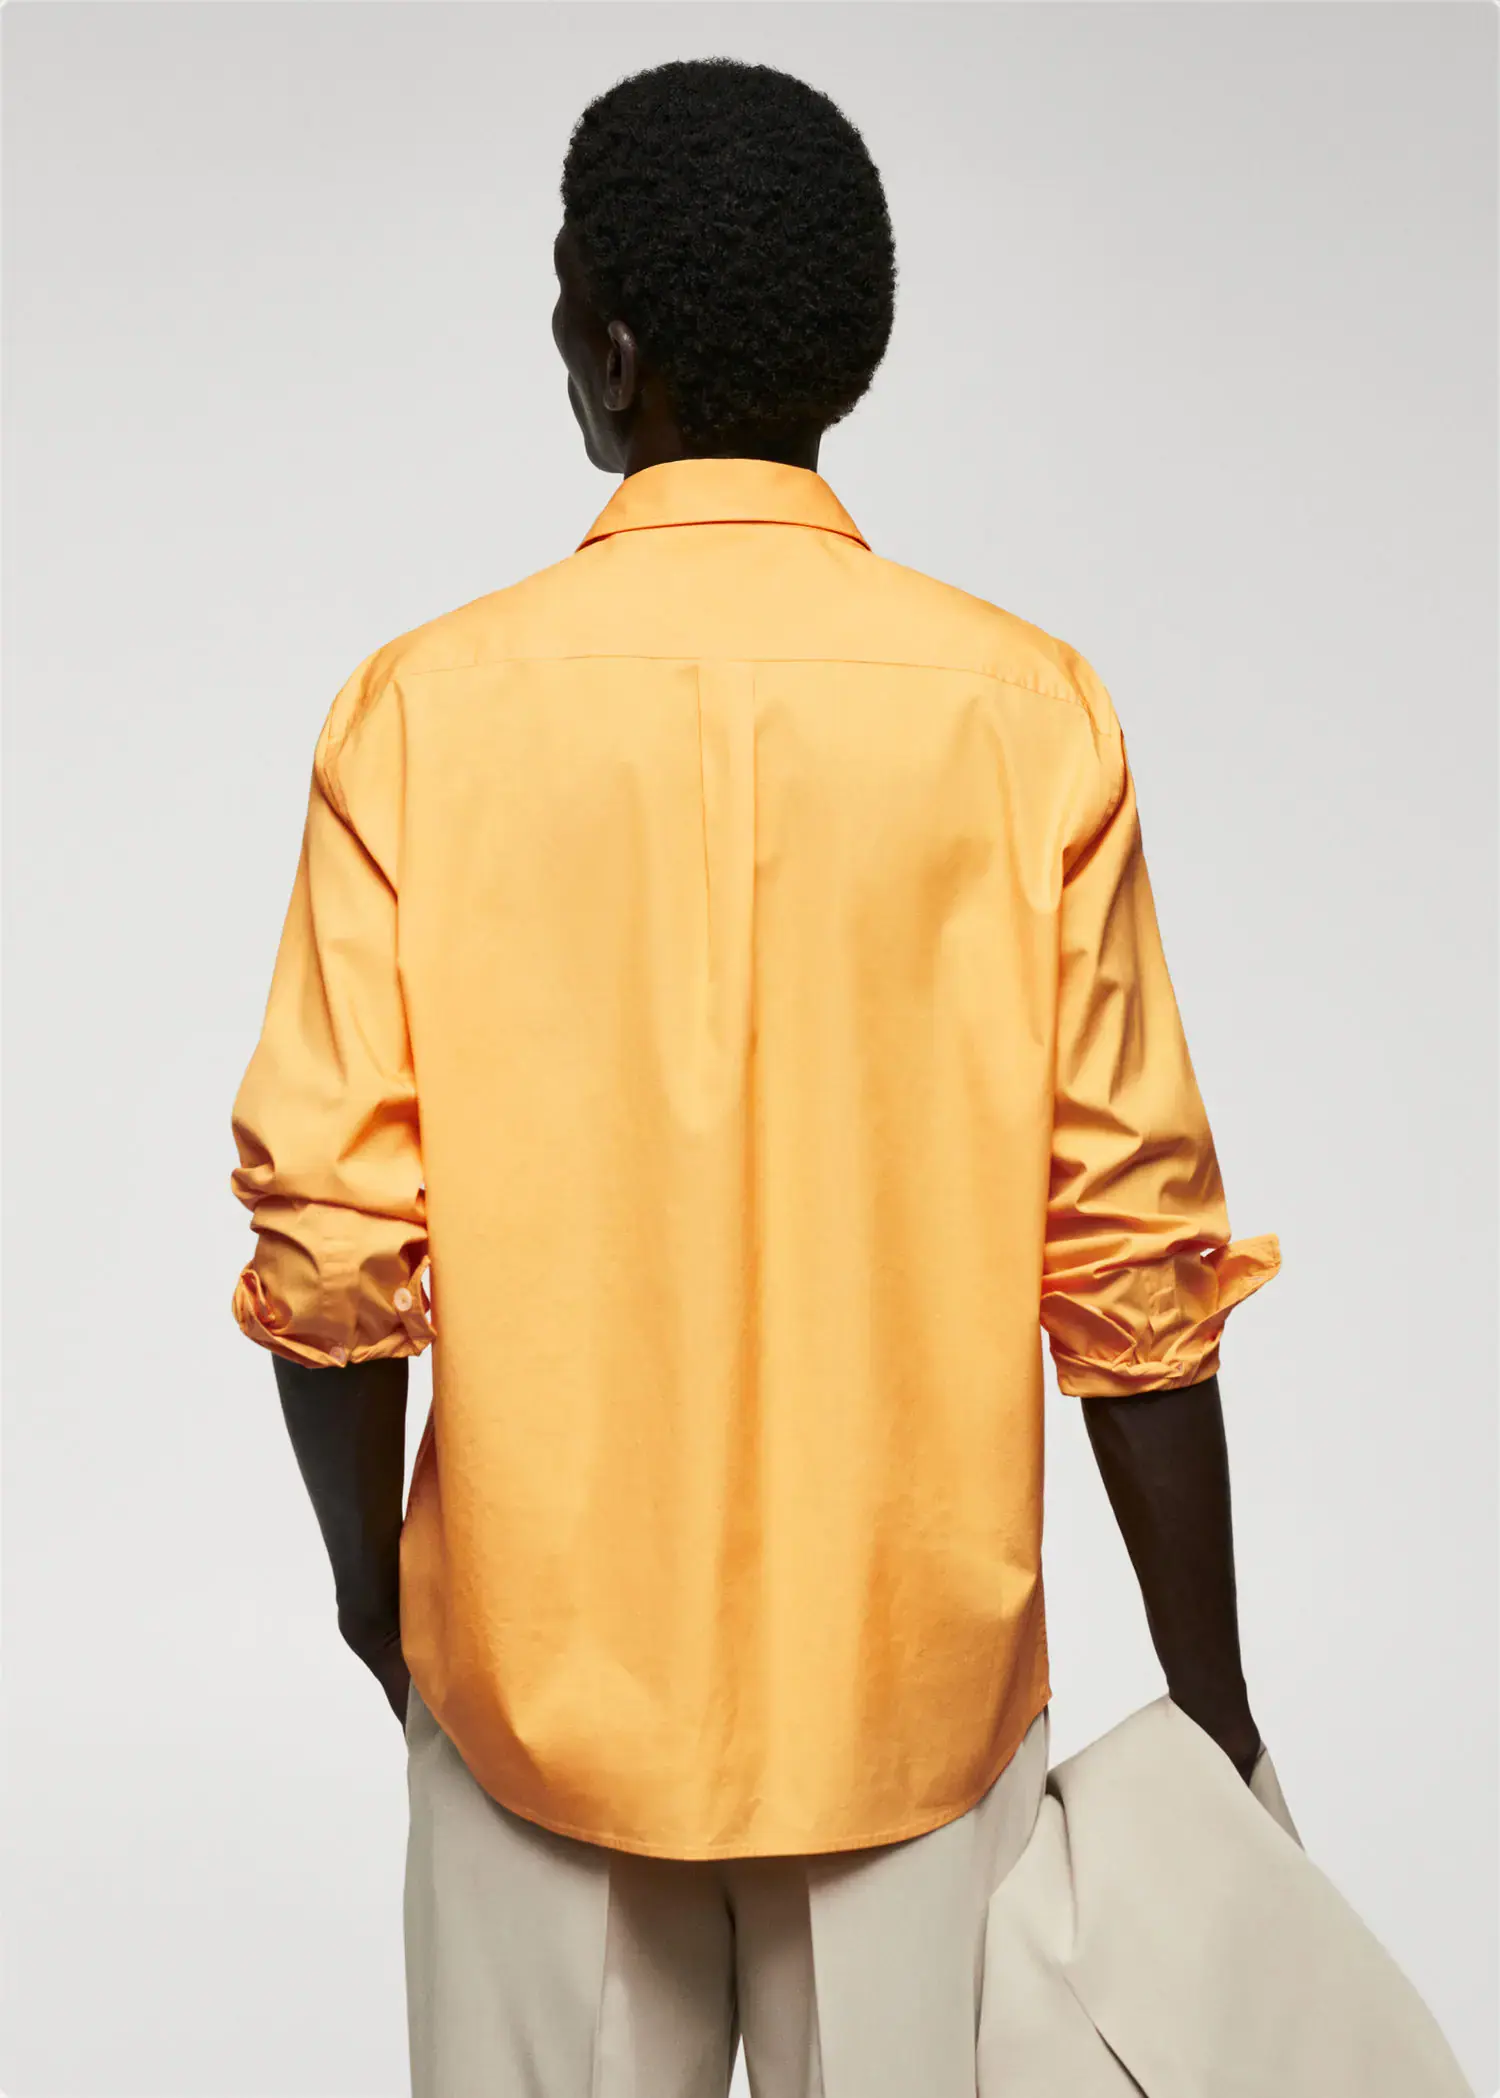 Mango 100% cotton pocket shirt. a person wearing a yellow shirt and holding a book. 